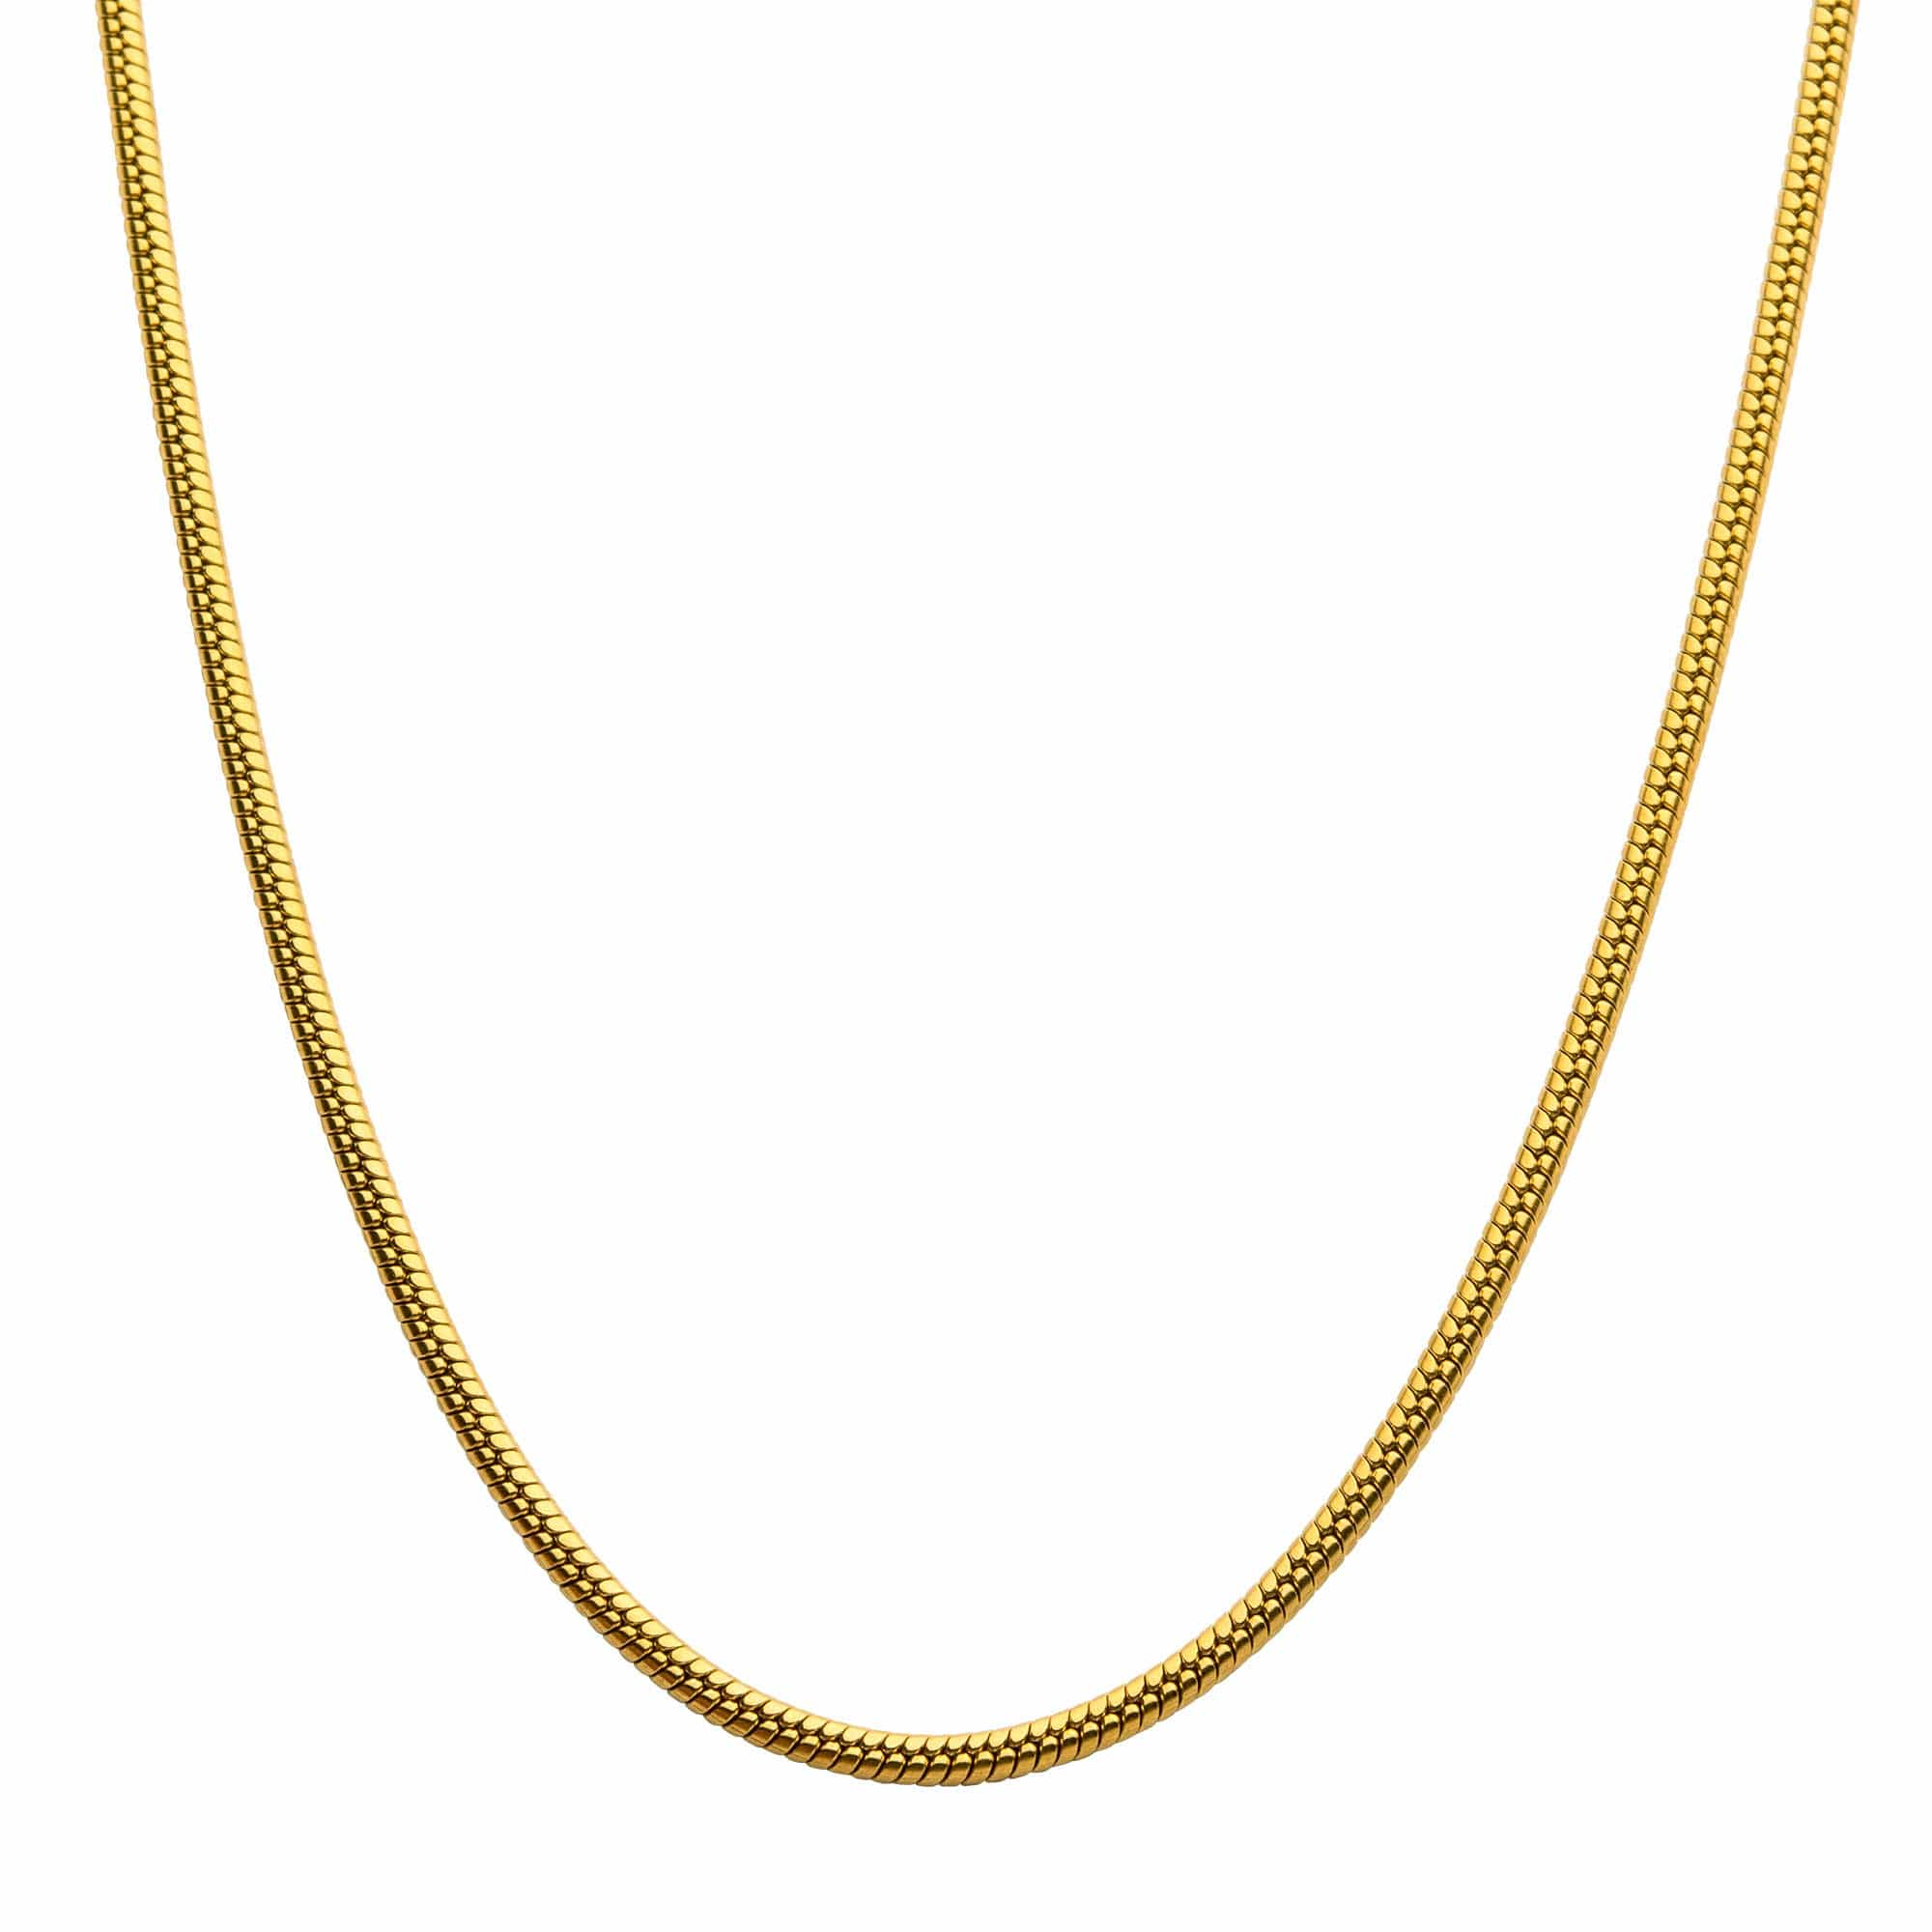 INOX JEWELRY Chains 18K Gold Ion Plated Stainless Steel 3mm Rattail Chain